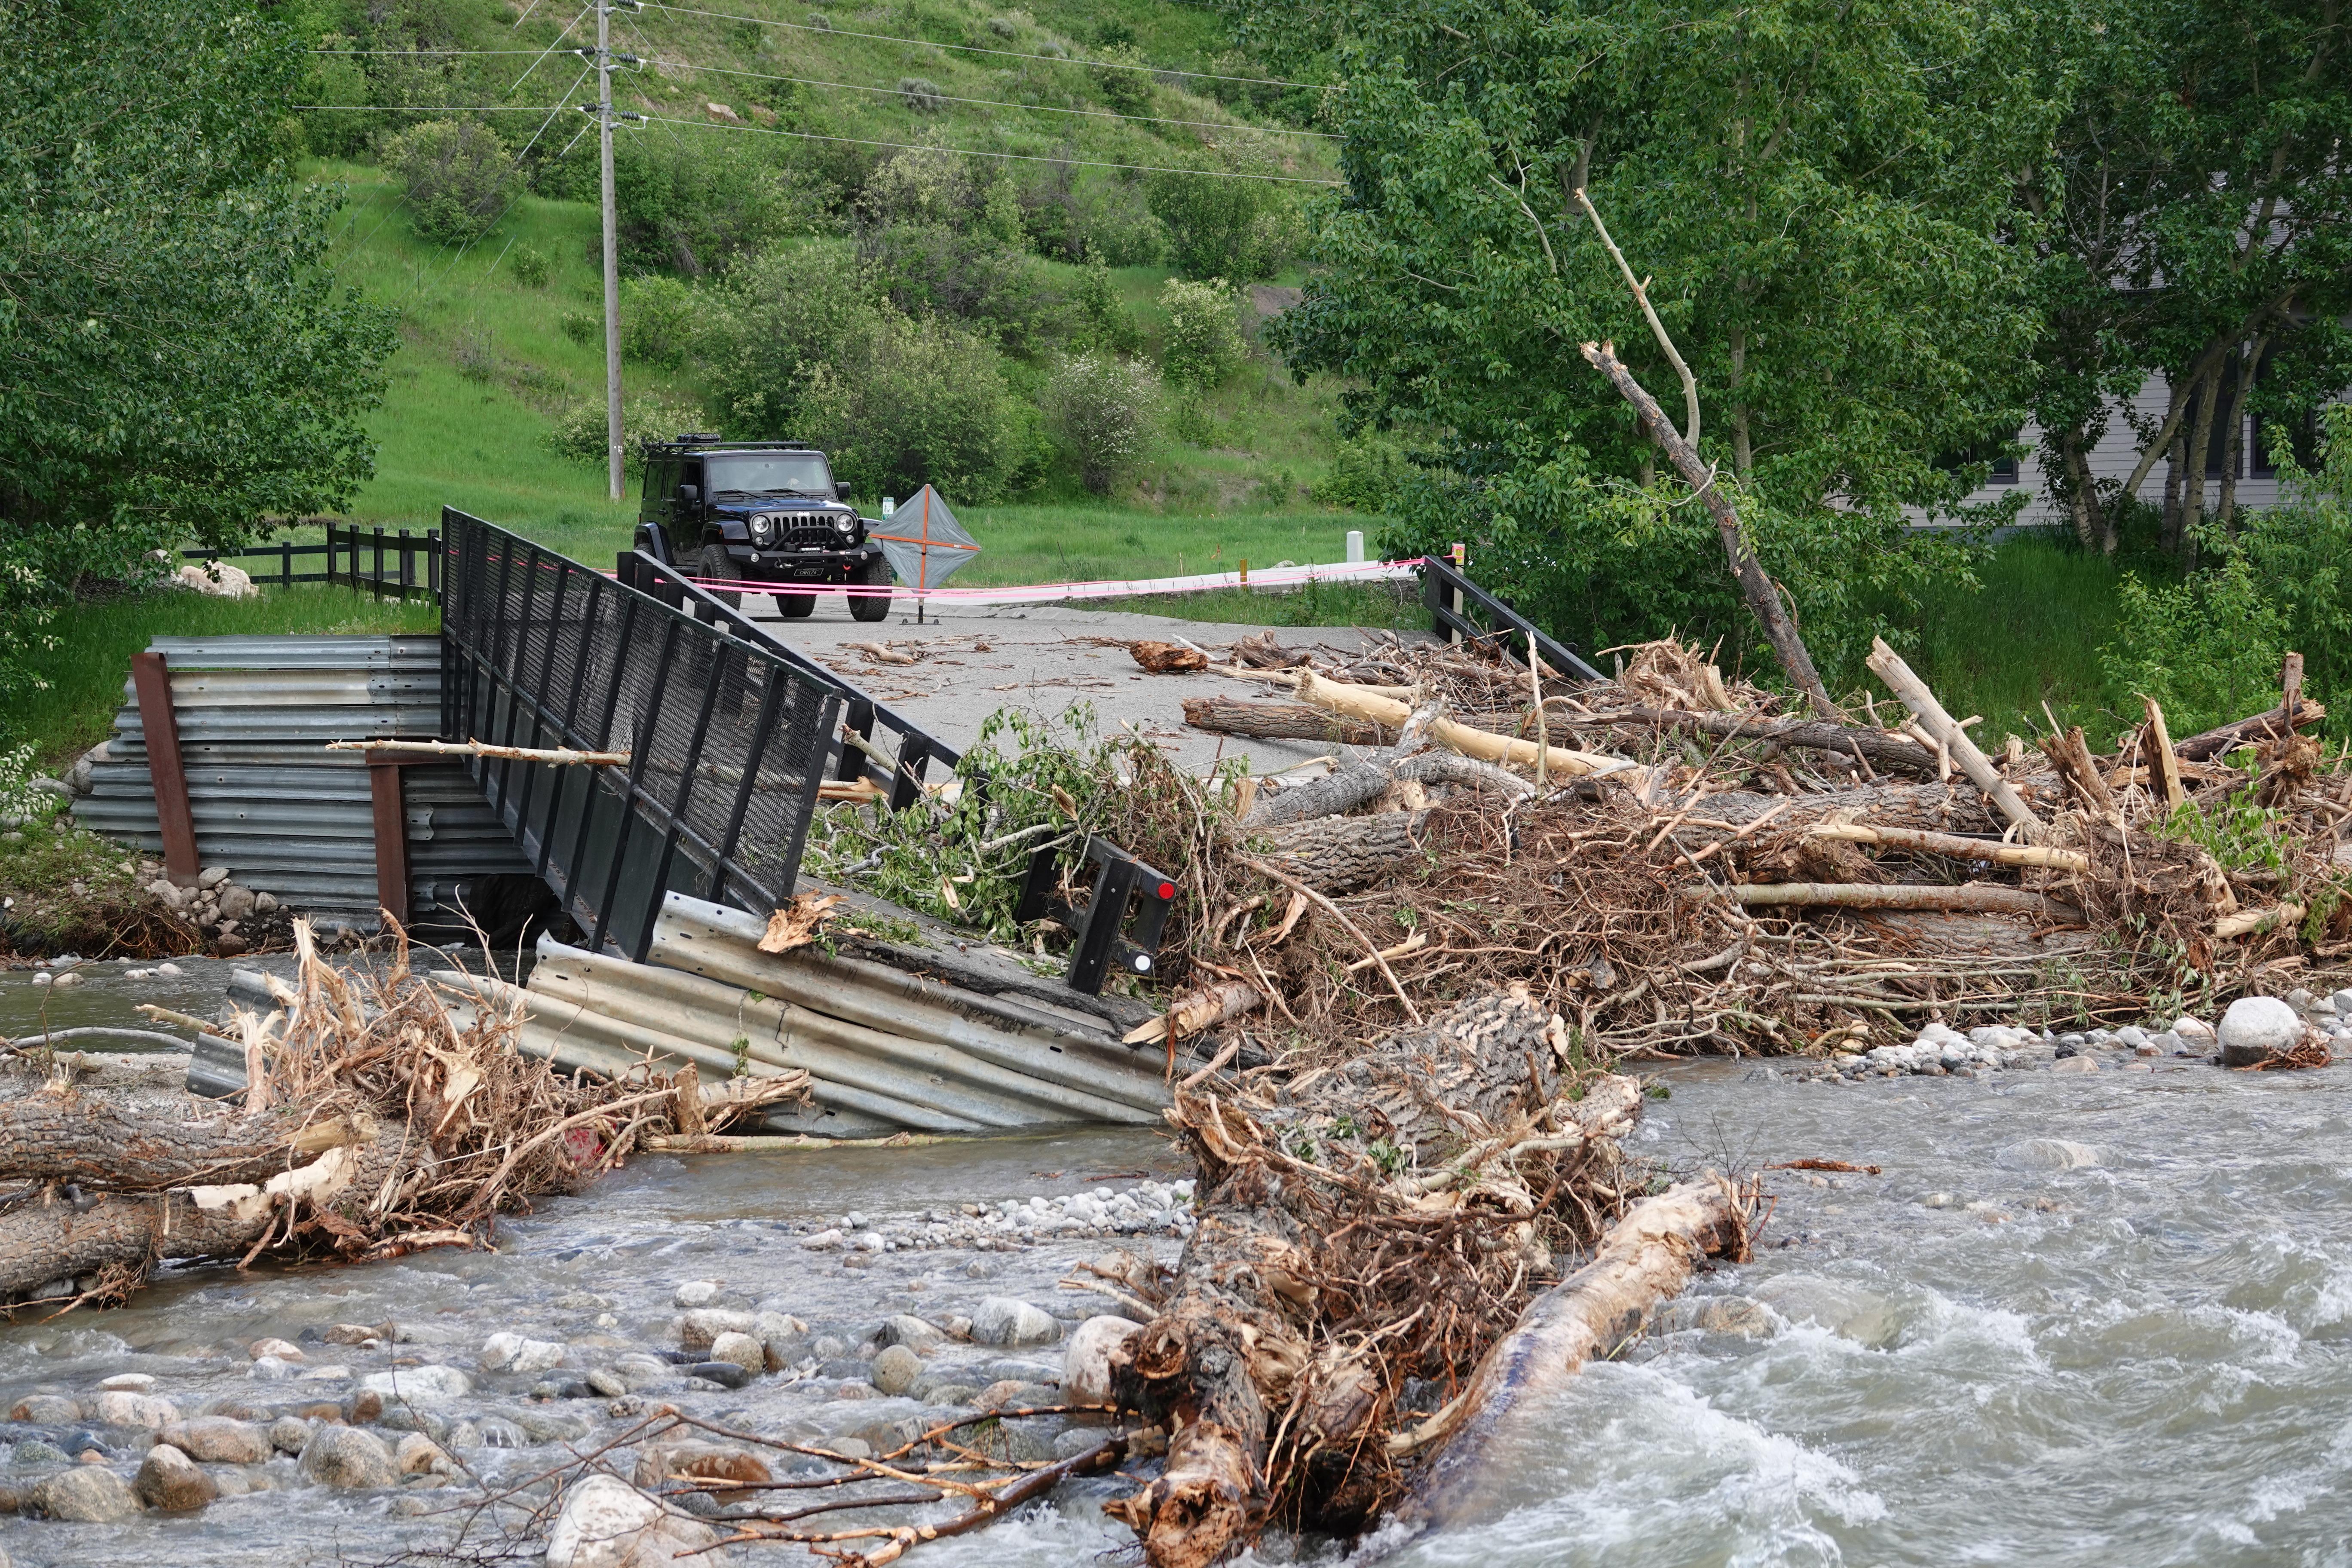 Rapidly flowing creek with bridge out; damaged bridge and debris on both sides of creek